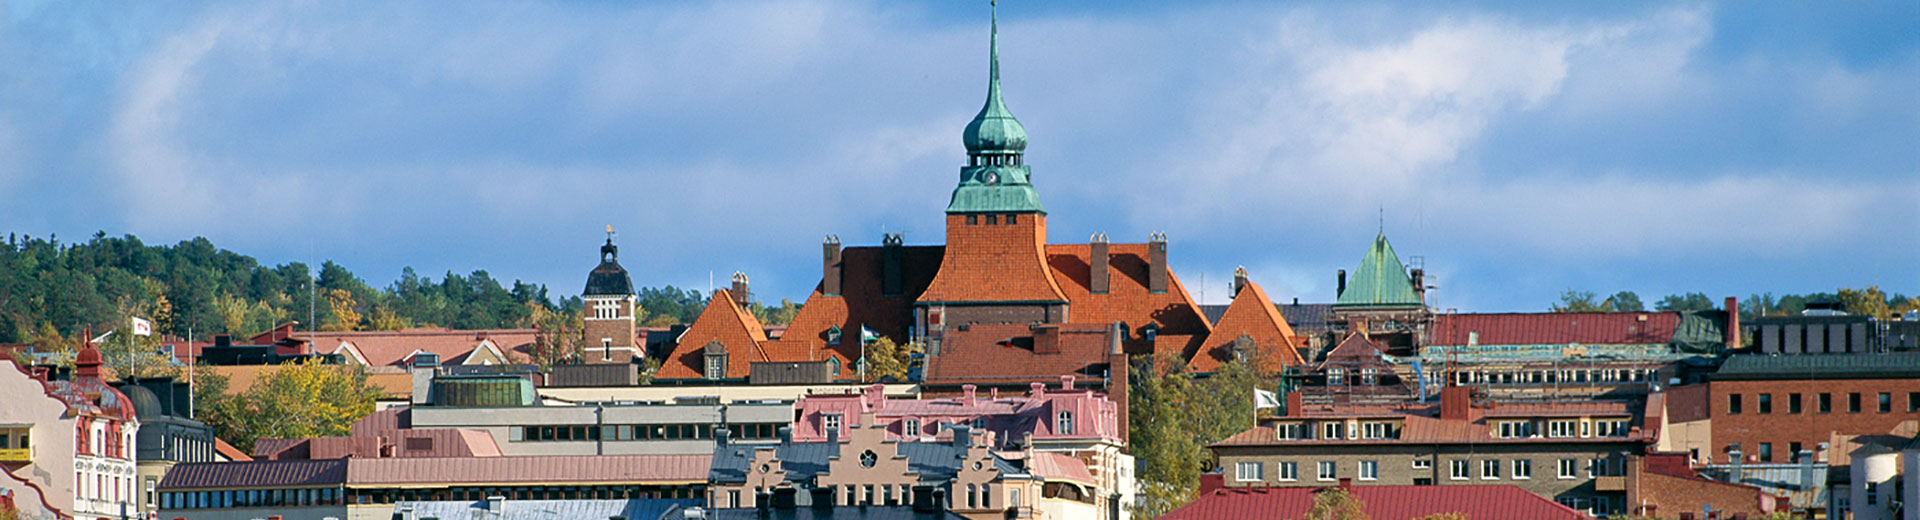 Grant Thornton is your auditing firm in Östersund